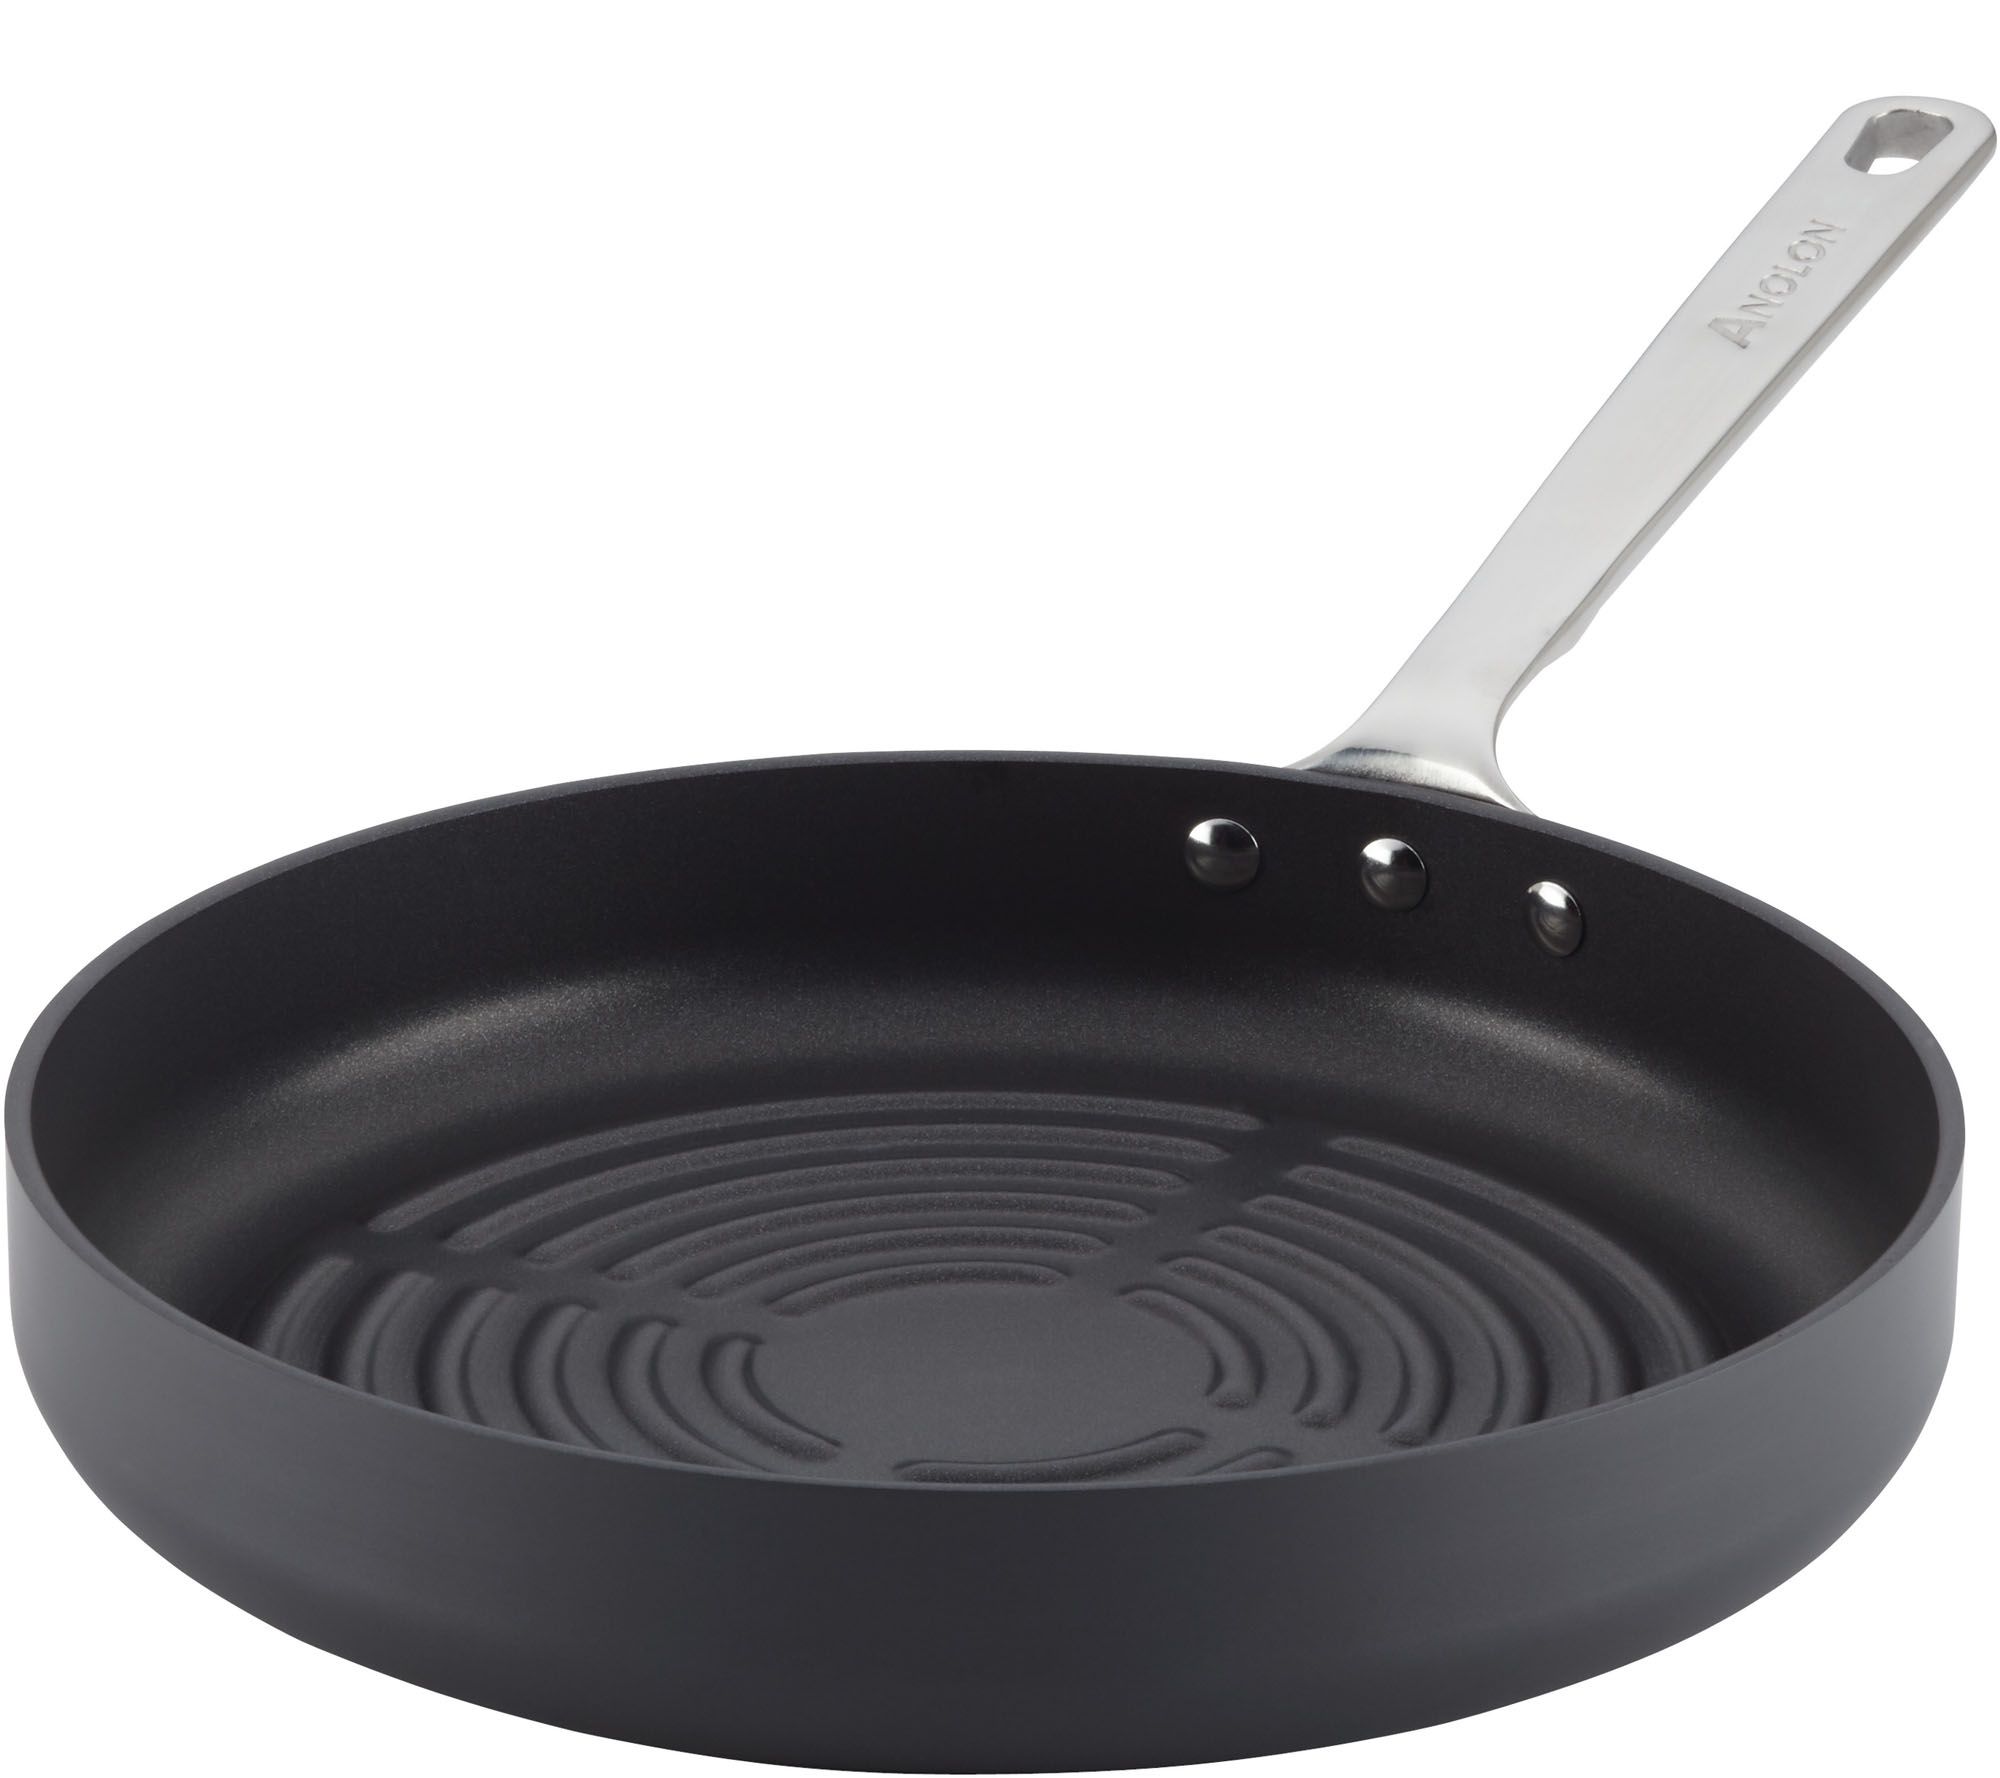 Anolon Accolade Forged Hard-Anodized Nonstick Deep Frying Pan with